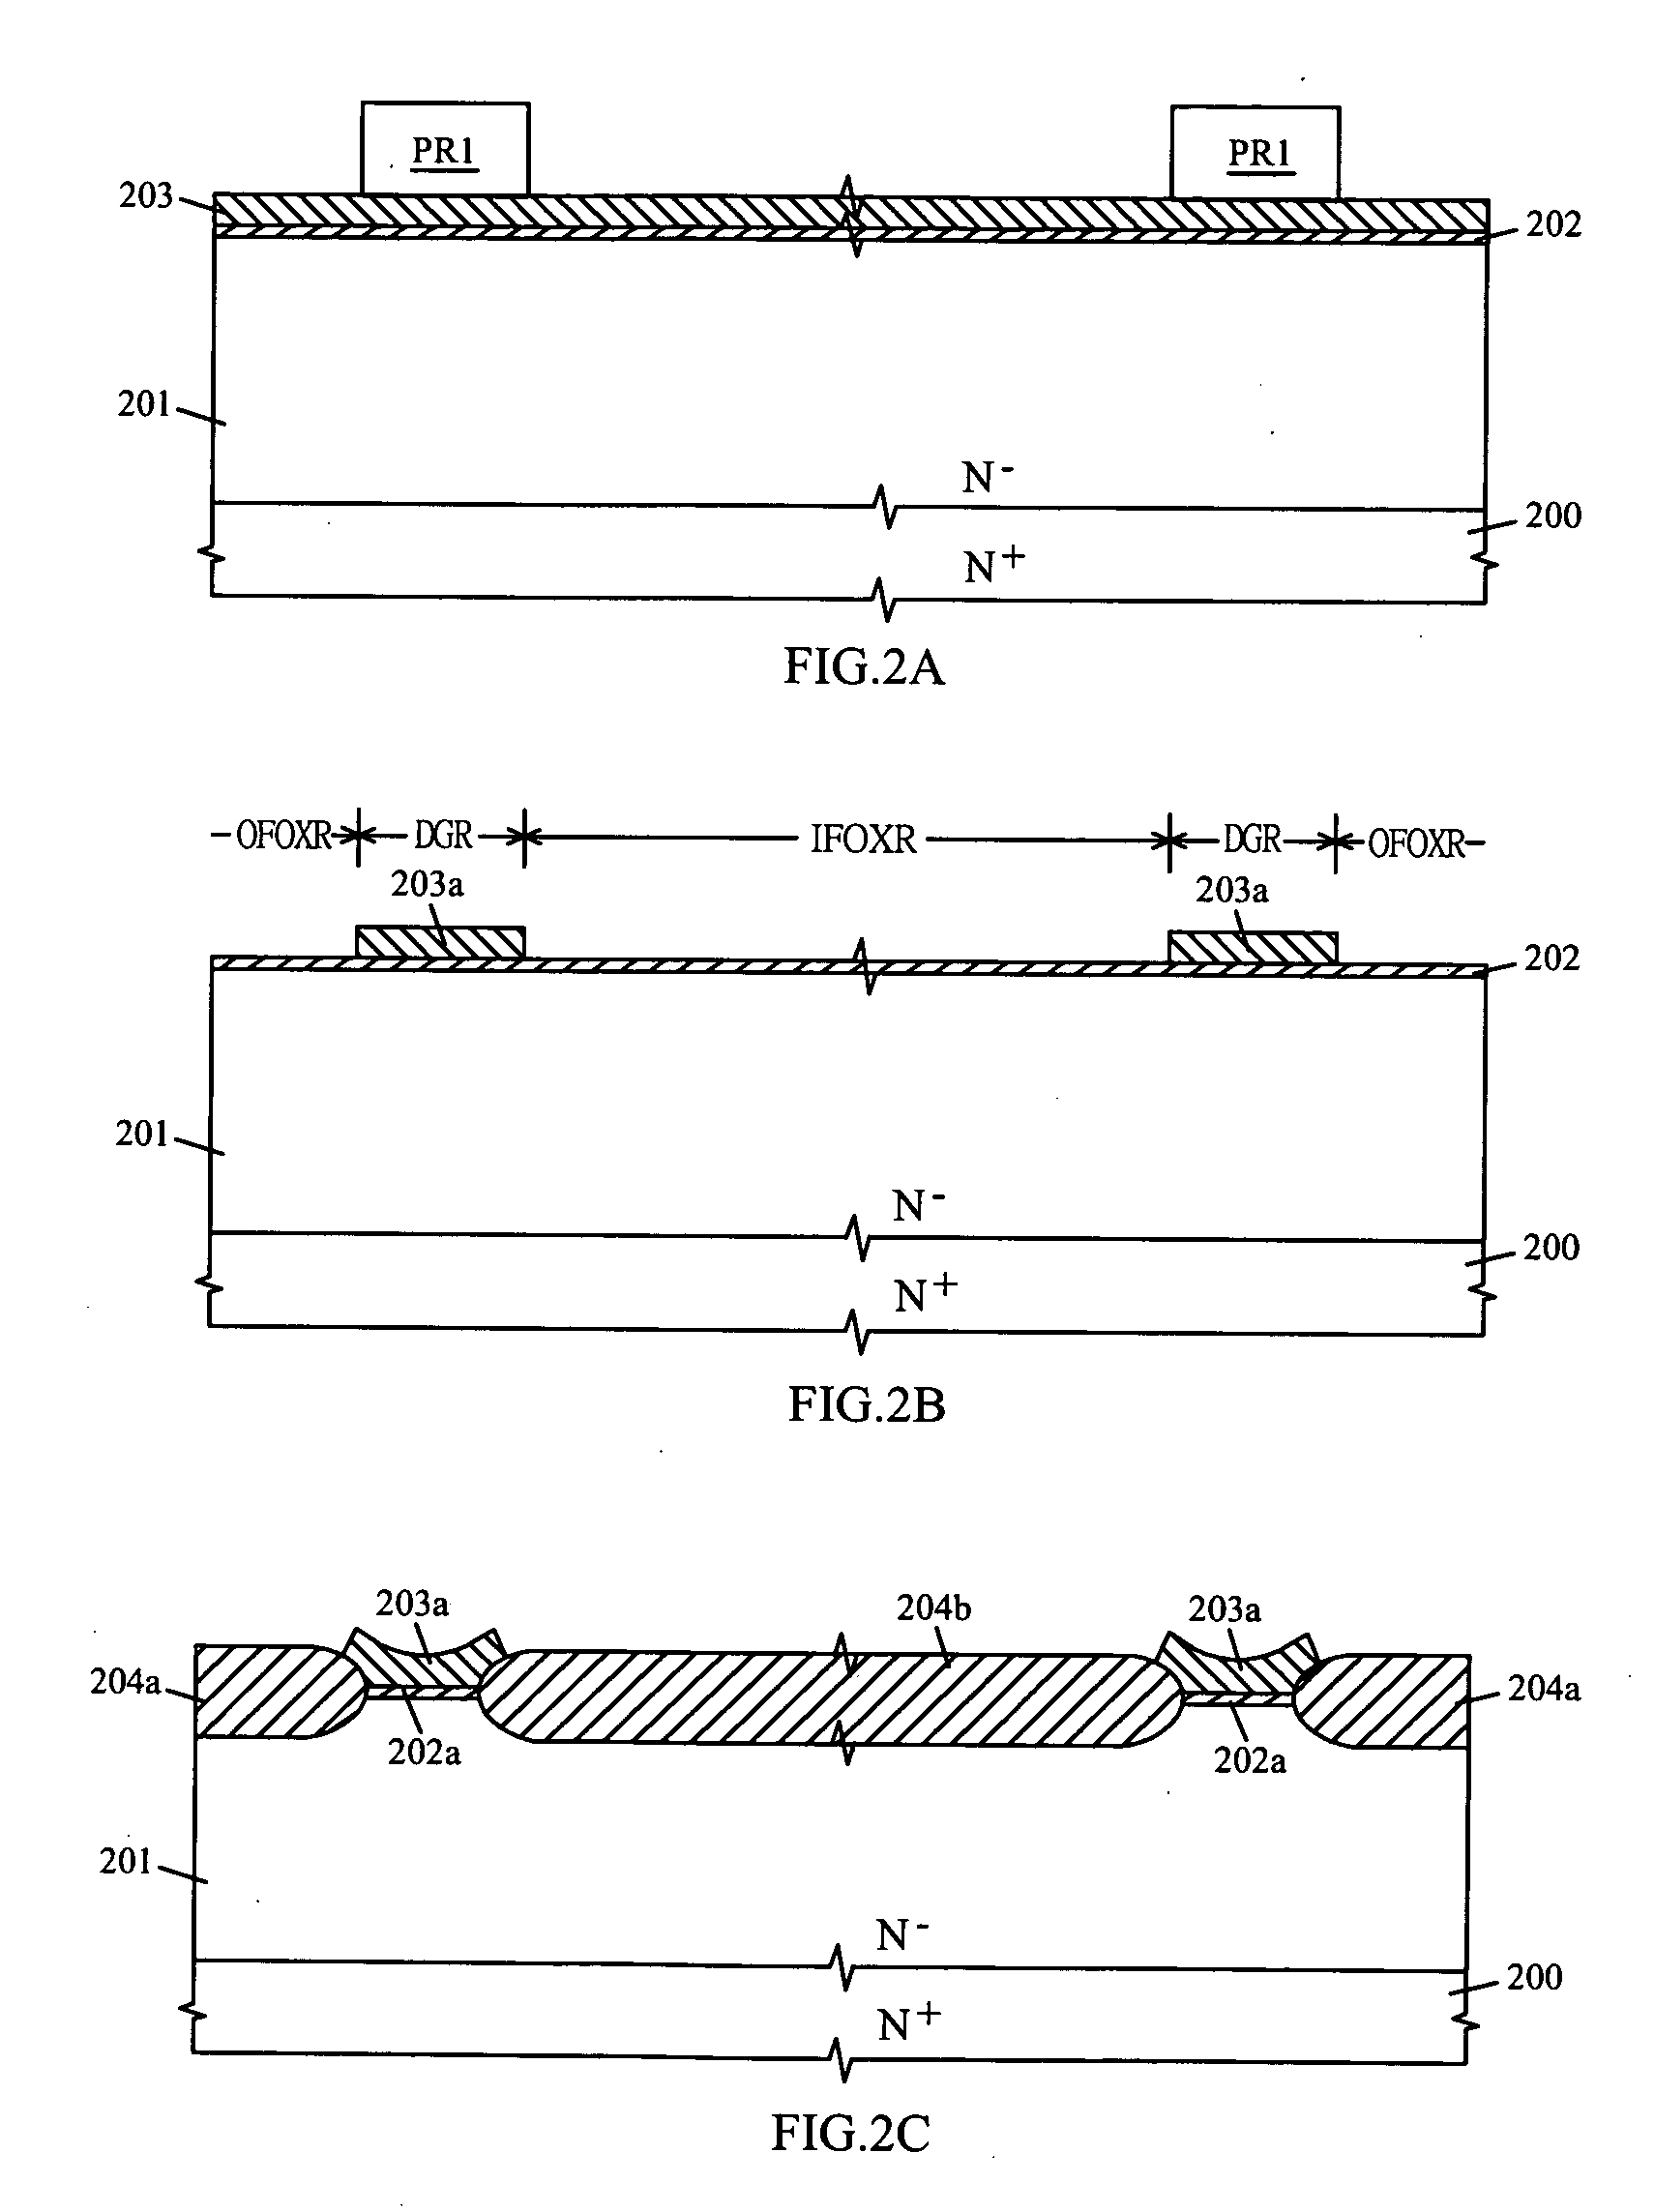 LOCOS-based Schottky barrier diode and its manufacturing methods